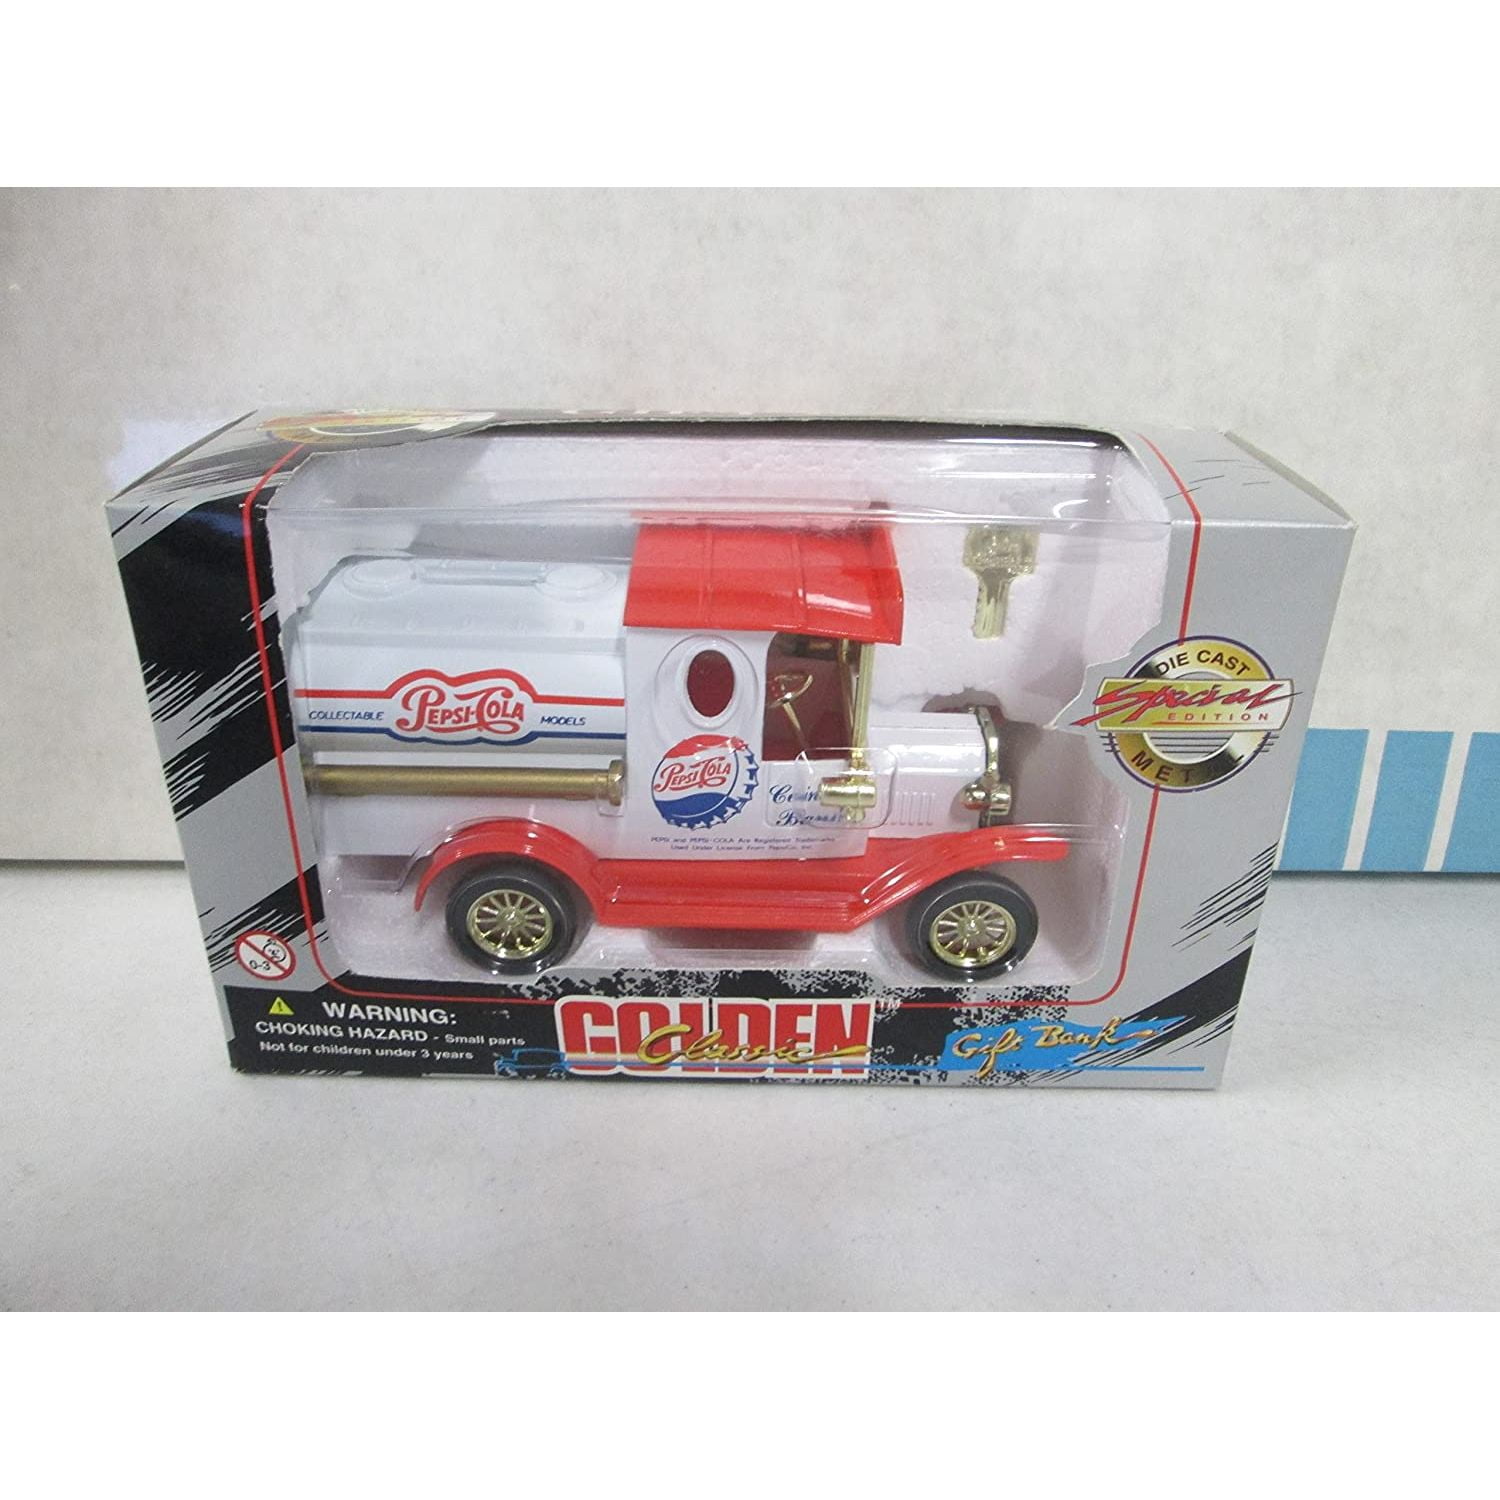 Details about   PEPSI COLA DIECAST STEP VAN BANK  GOLDEN WHEEL CLASSIC NEW IN BOX 